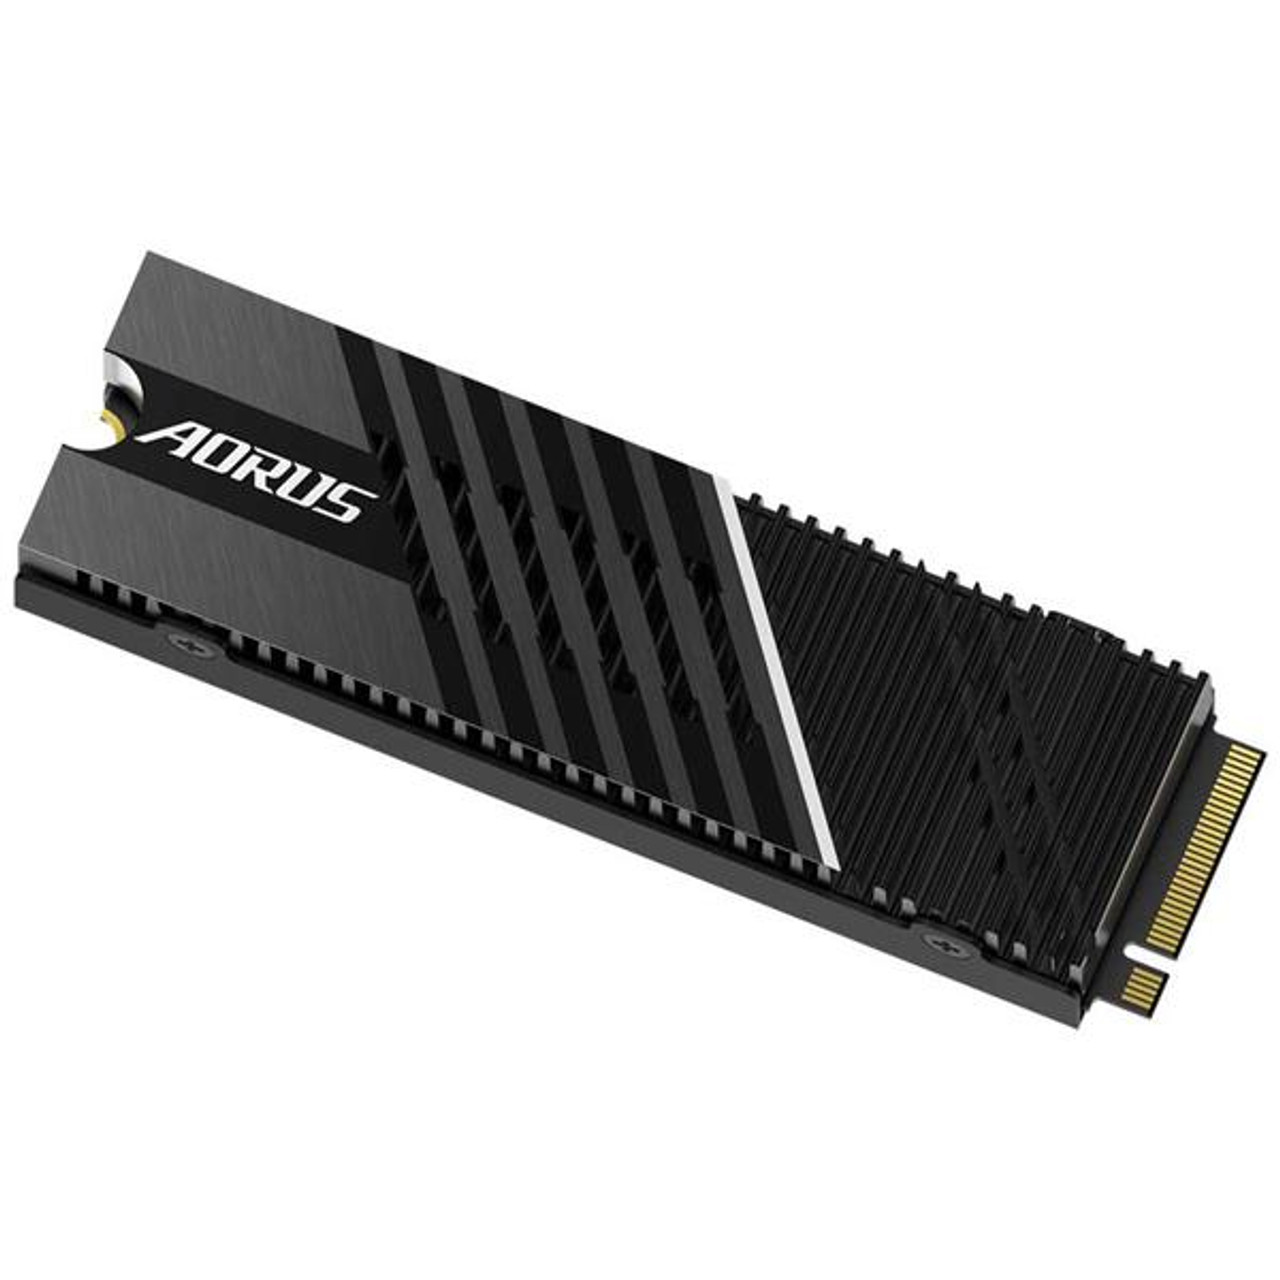 Aorus GP-AG70S1TB 1000 GB Solid State Drive - M.2 2280 Internal - PCI Express (PCI Express NVMe 4.0 x4) - Gaming Console Device Supported - 7000